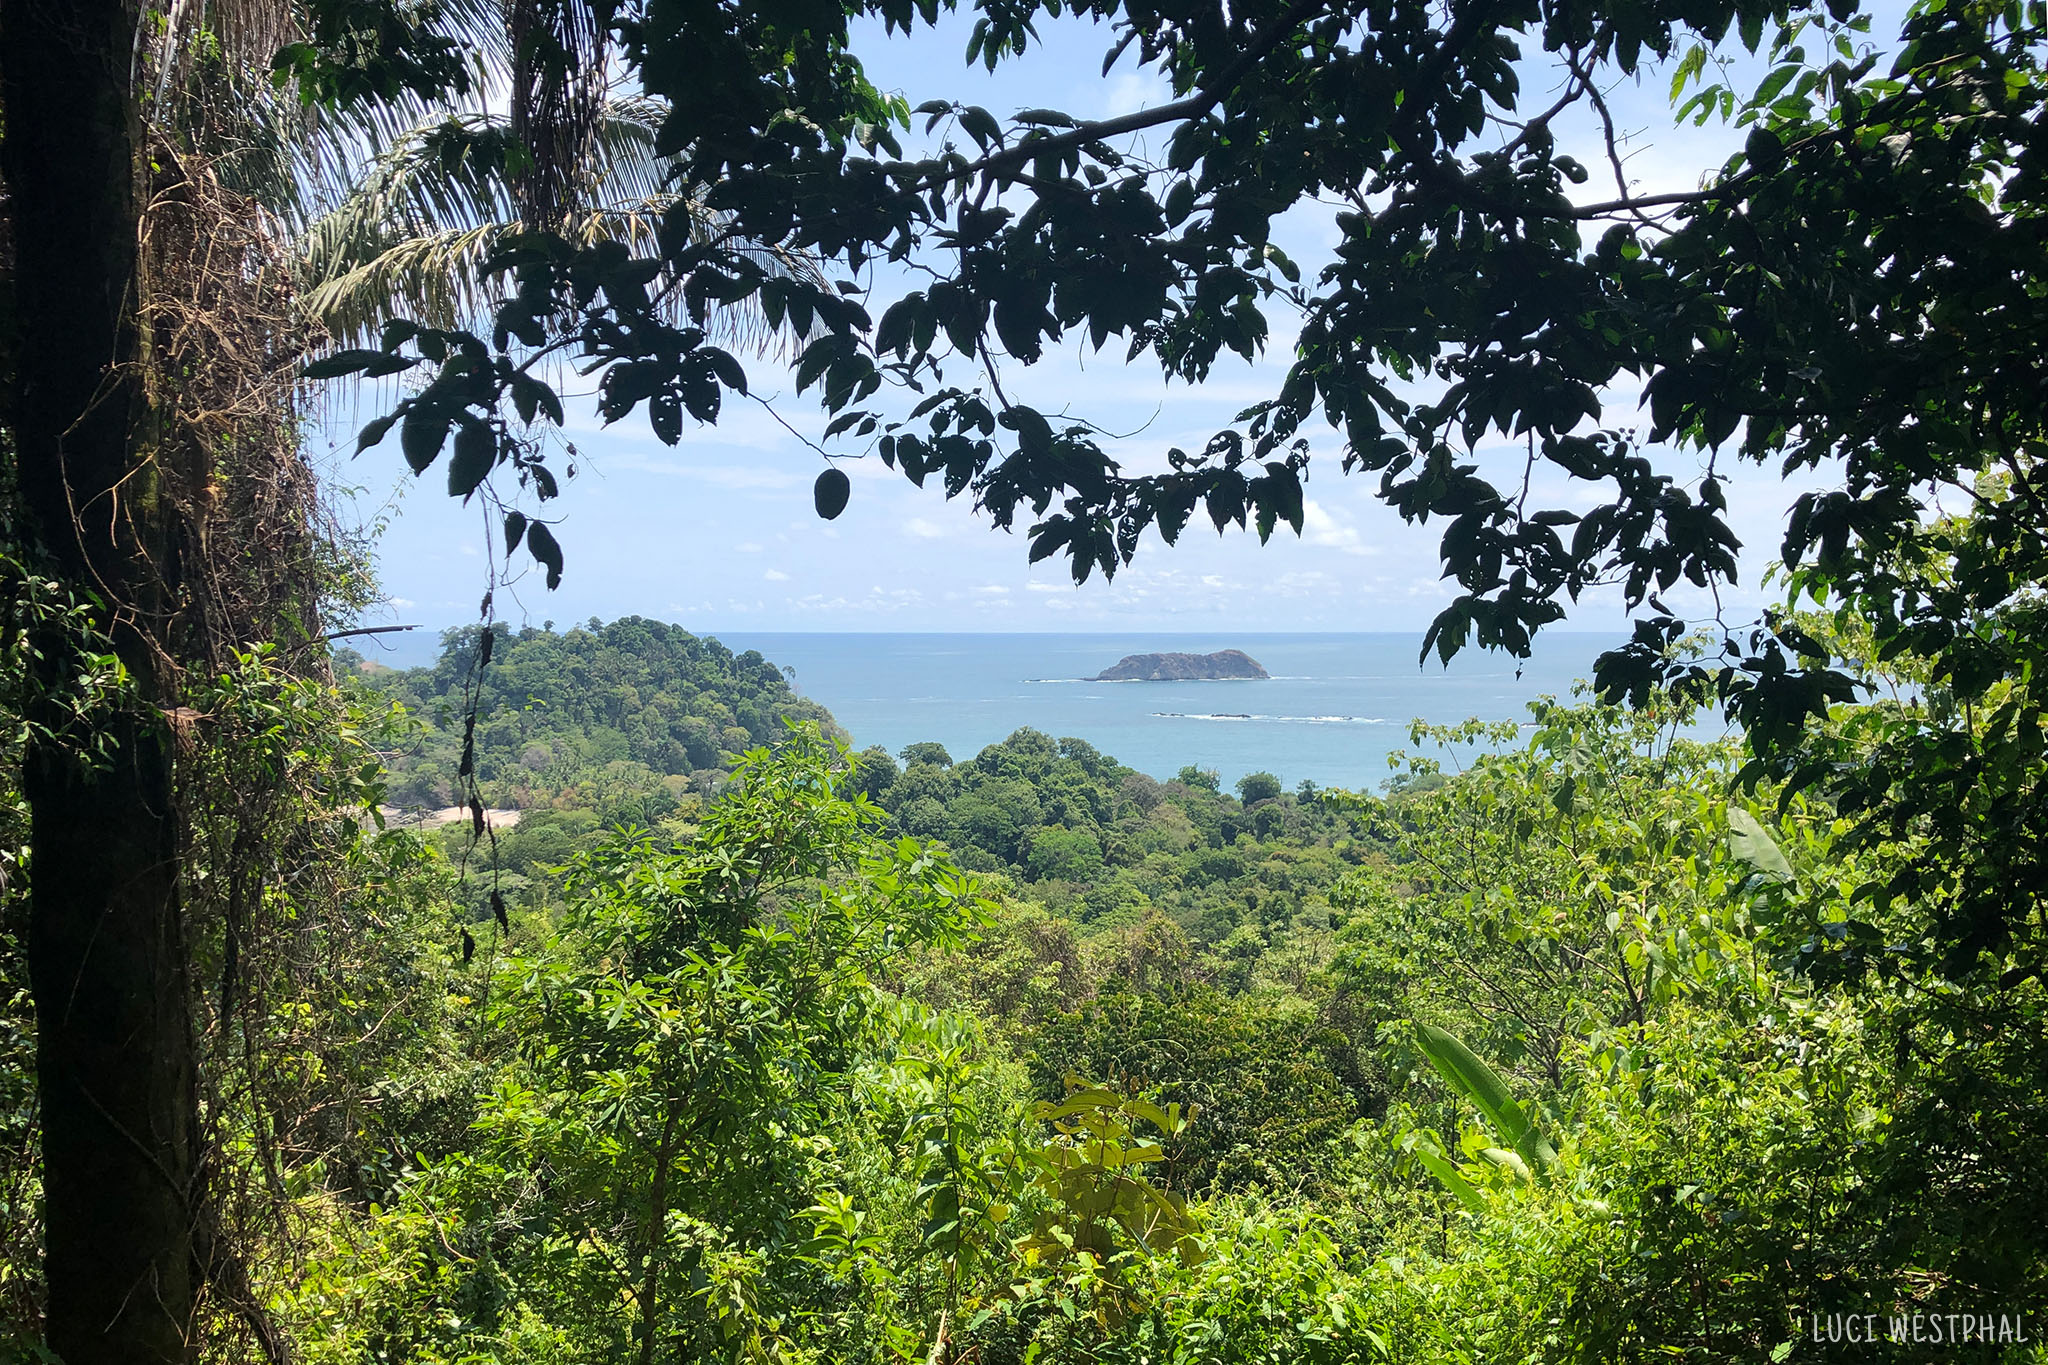 View from one of the highest points in Manuel Antonio National Park, Costa Rica